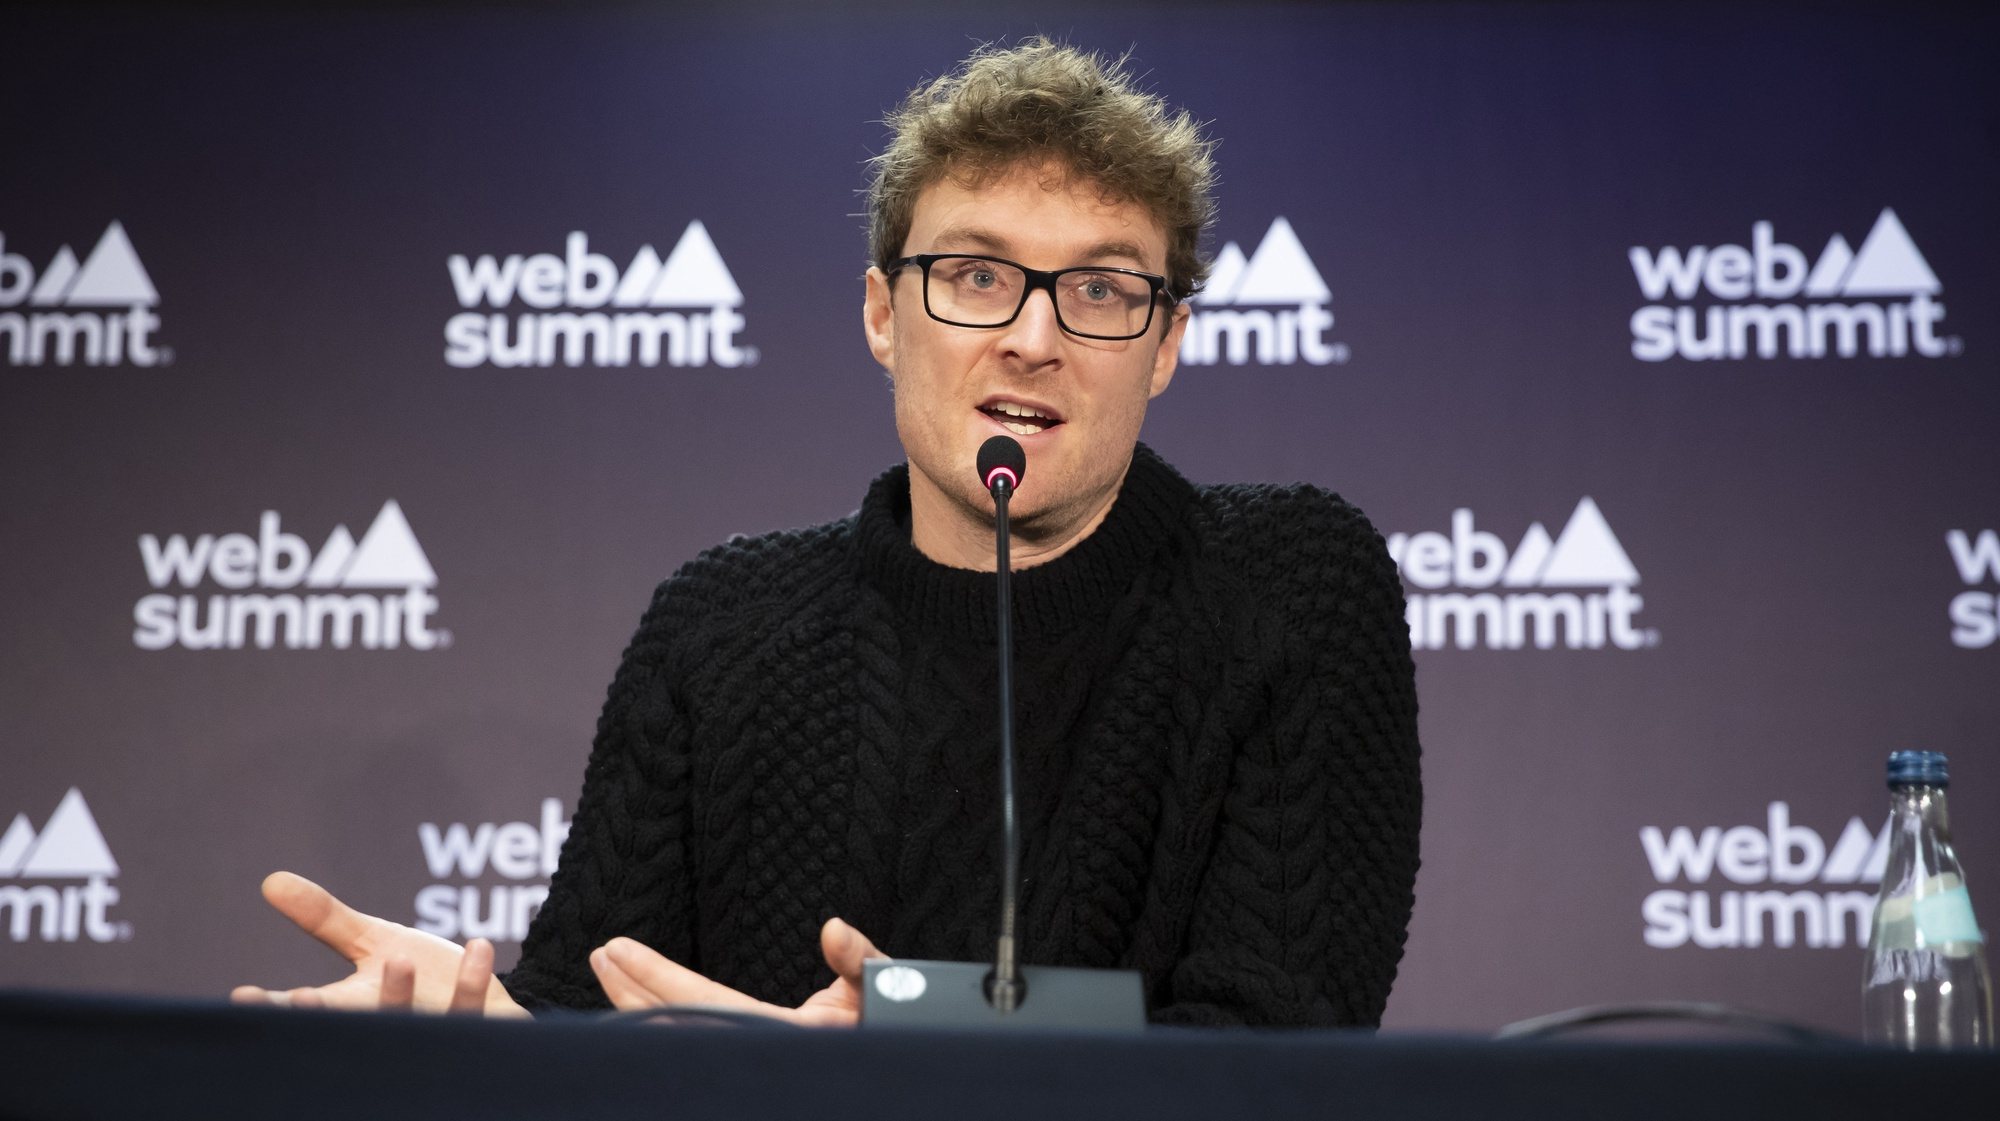 epa10283739 Co-founder of the Web Summit Paddy Cosgrave attends a press conference at Web Summiton on the third day of the Web Summit at Parque das Nacoes in Lisbon, Portugal, 03 November 2022. The Web Summit is considered the largest event of startups and technological entrepreneurship in the world, and takes place from 01 to 04 November in Lisbon.  EPA/JOSE SENA GOULAO